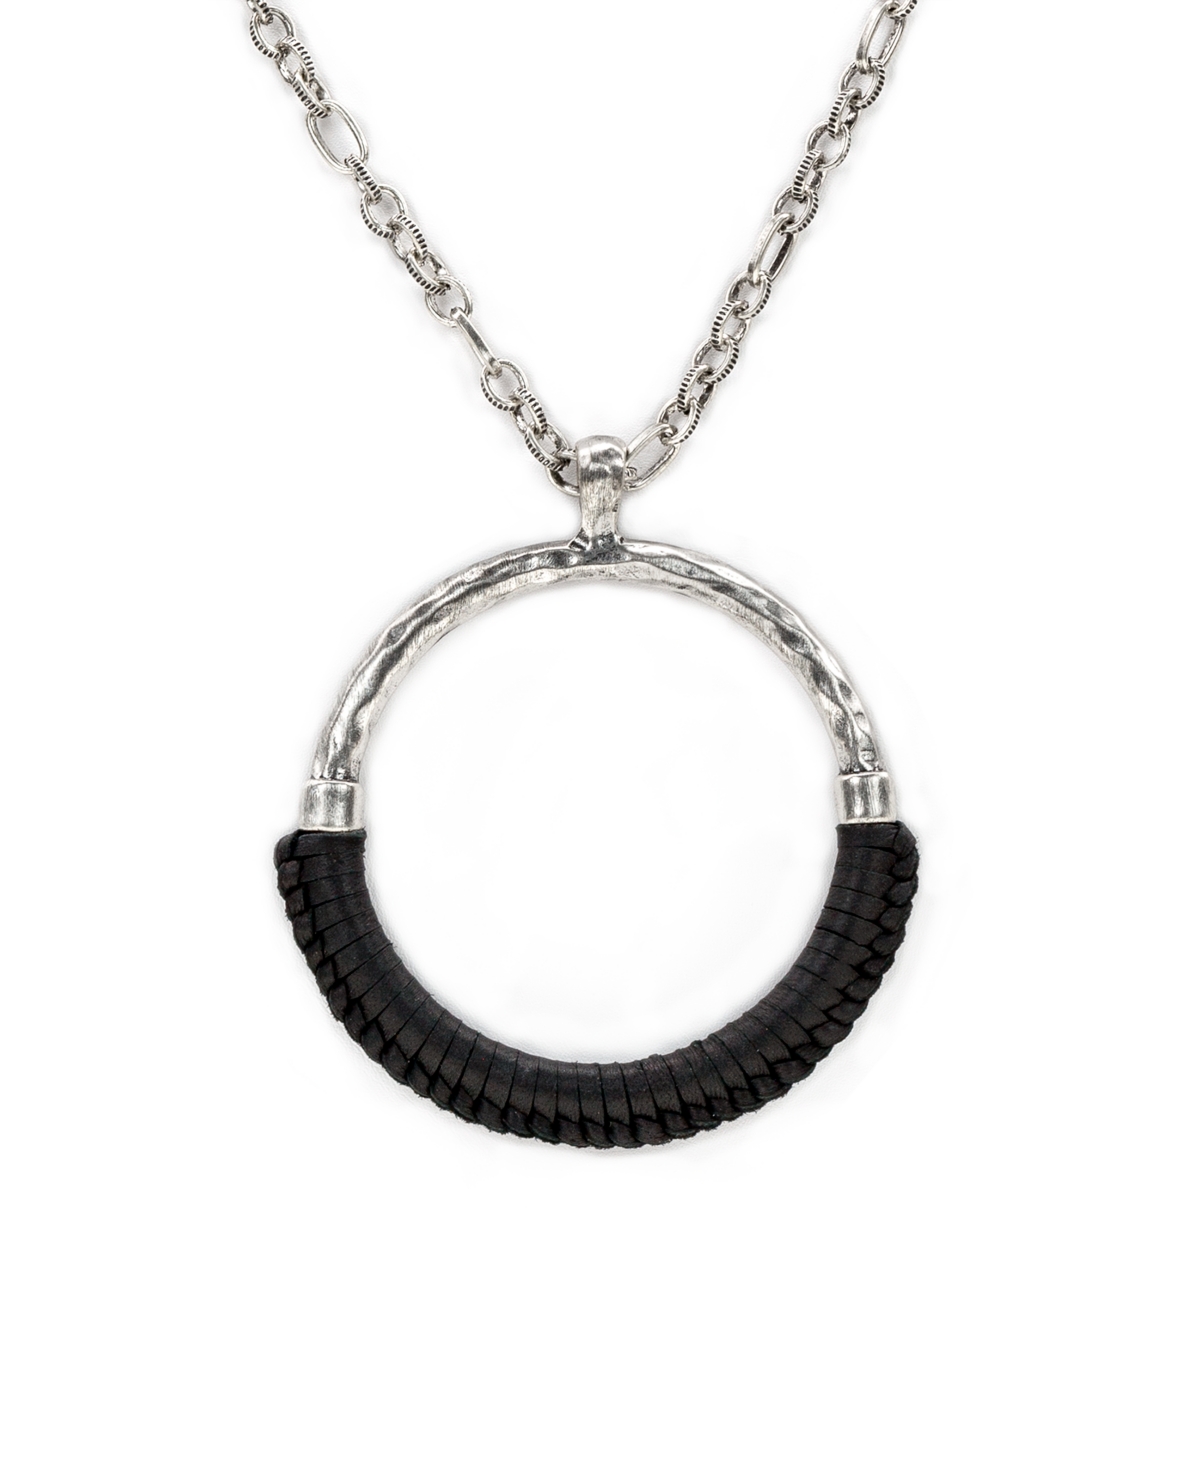 PATRICIA NASH SILVER-TONE LEATHER-WRAPPED RING LONG PENDANT NECKLACE, 30" + 2" EXTENDER